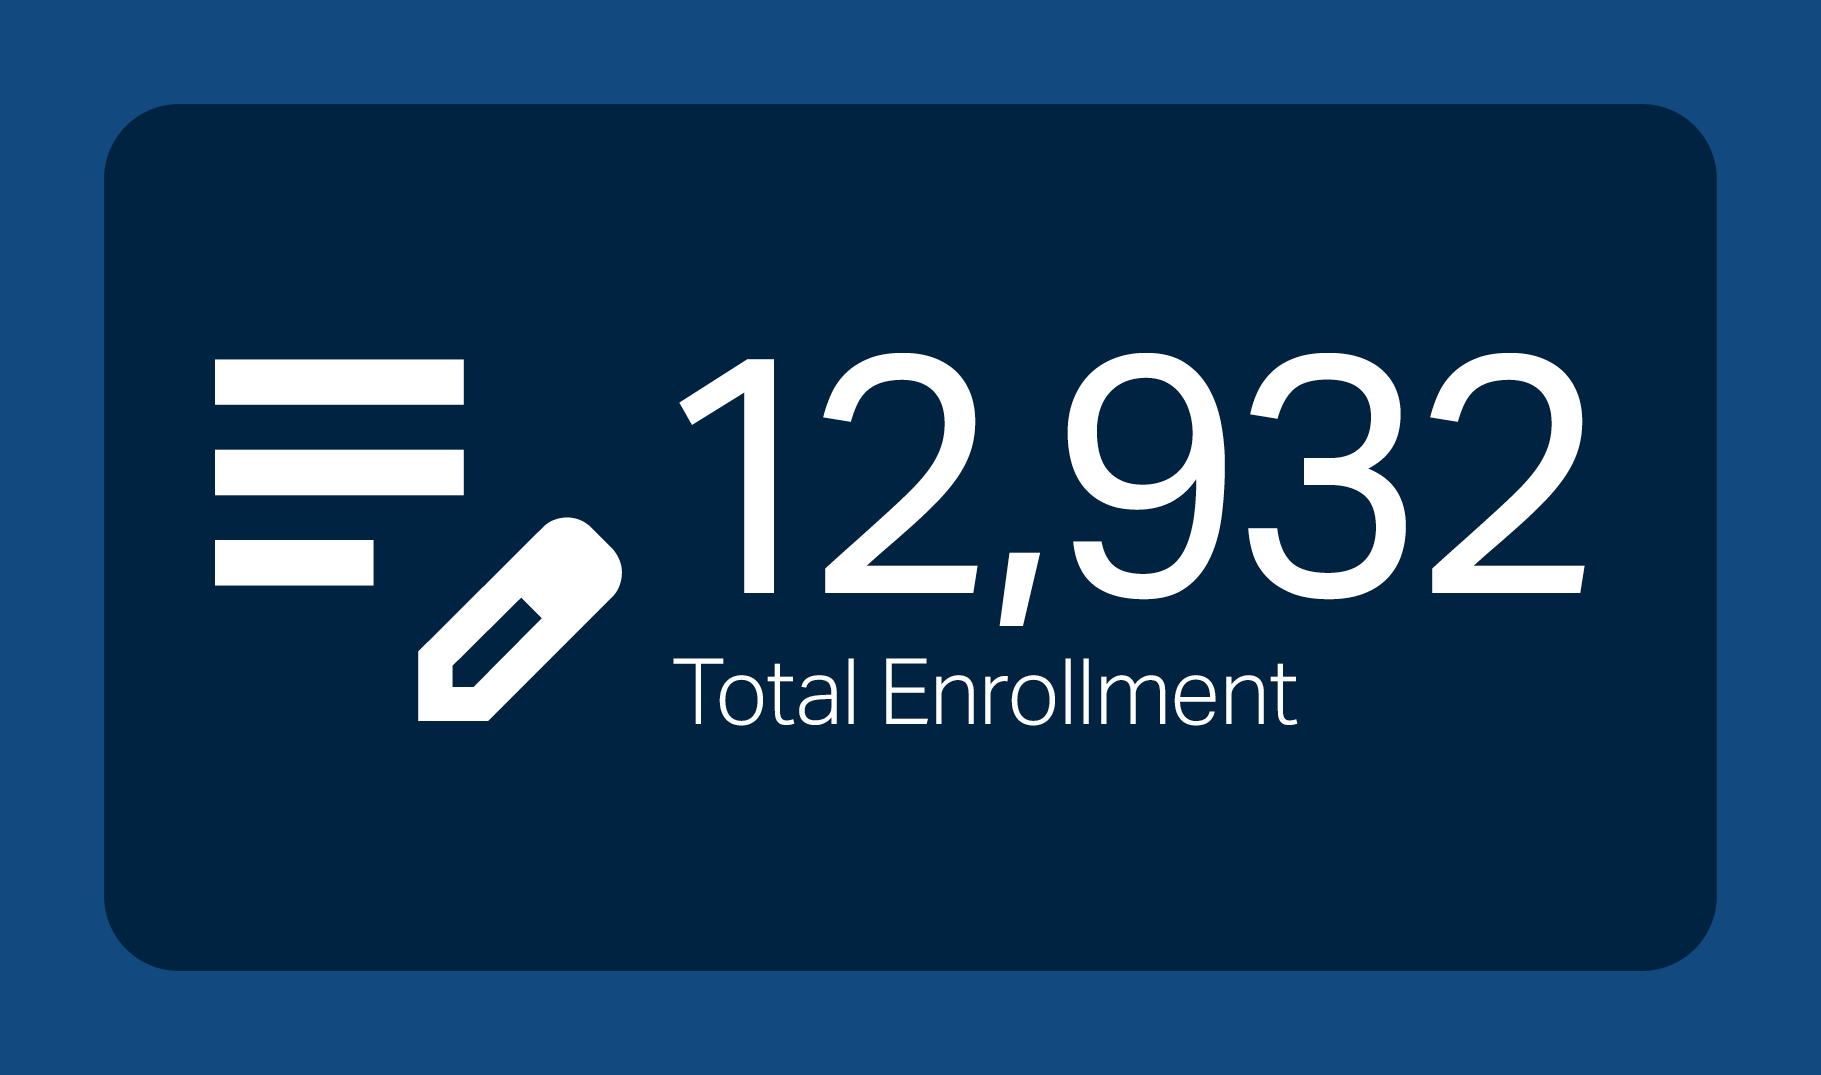 Clark's total enrollment at time of posting is 12,932